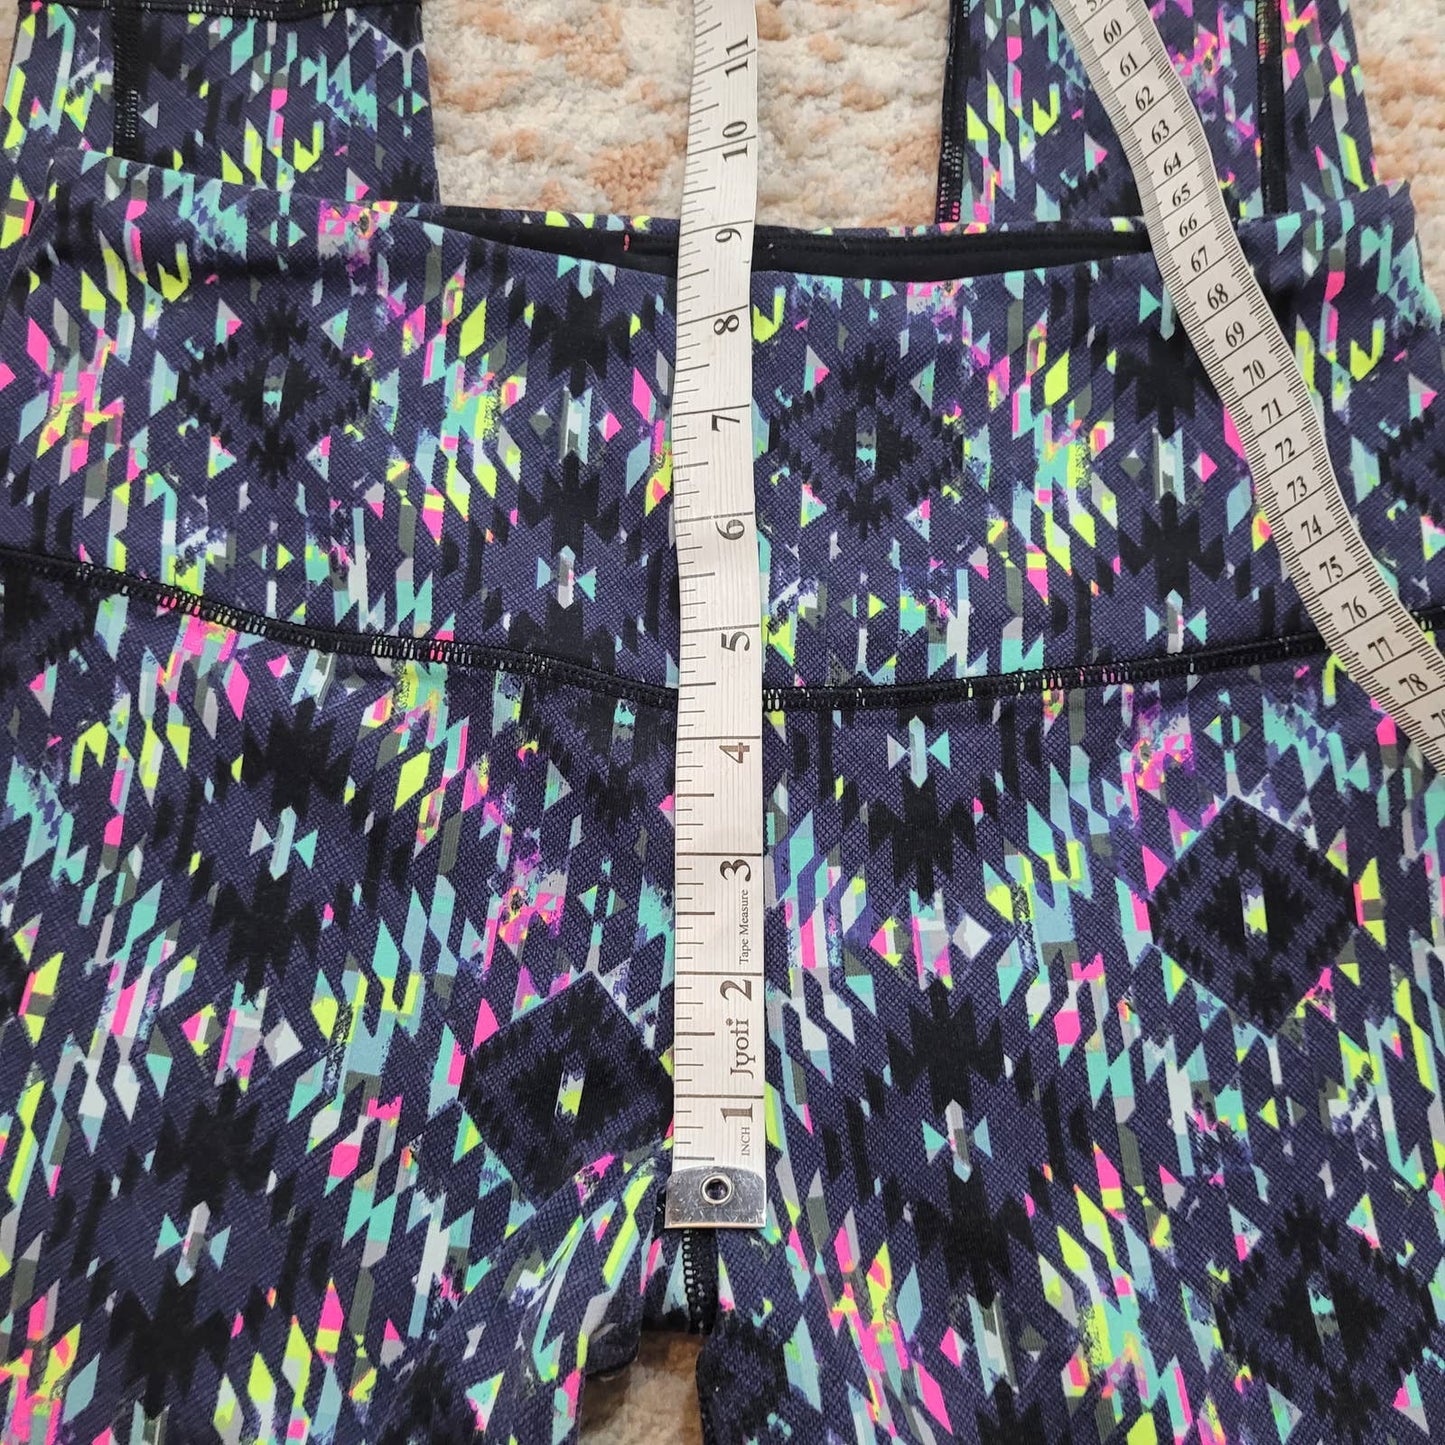 Knockout by Victoria’s Secret Sport Leggings VSX Ikat Abstract - Size Small